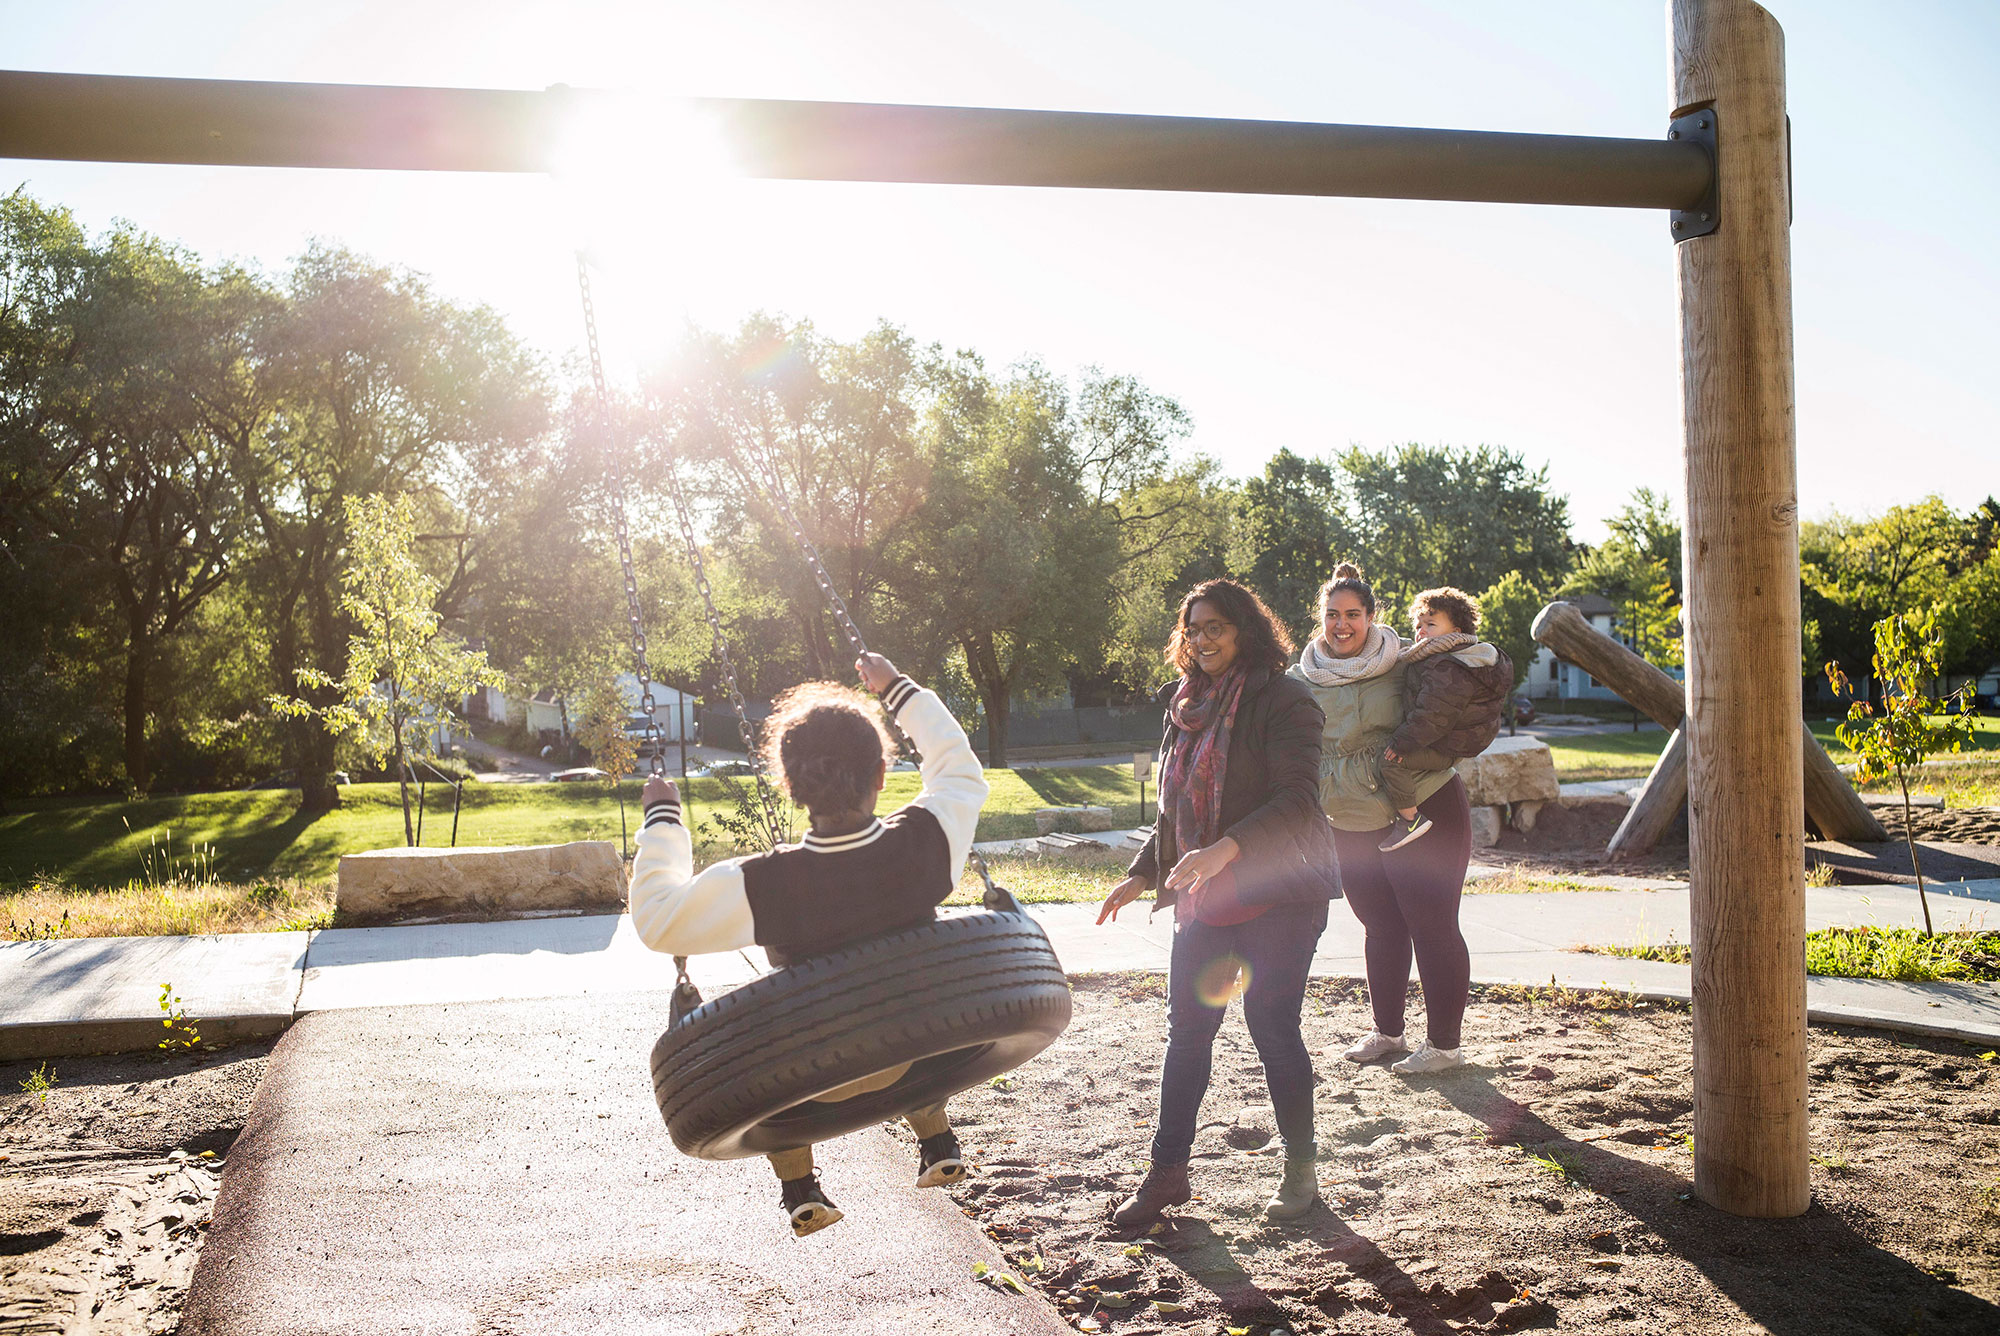 A group of people playing on a swing at a playground.